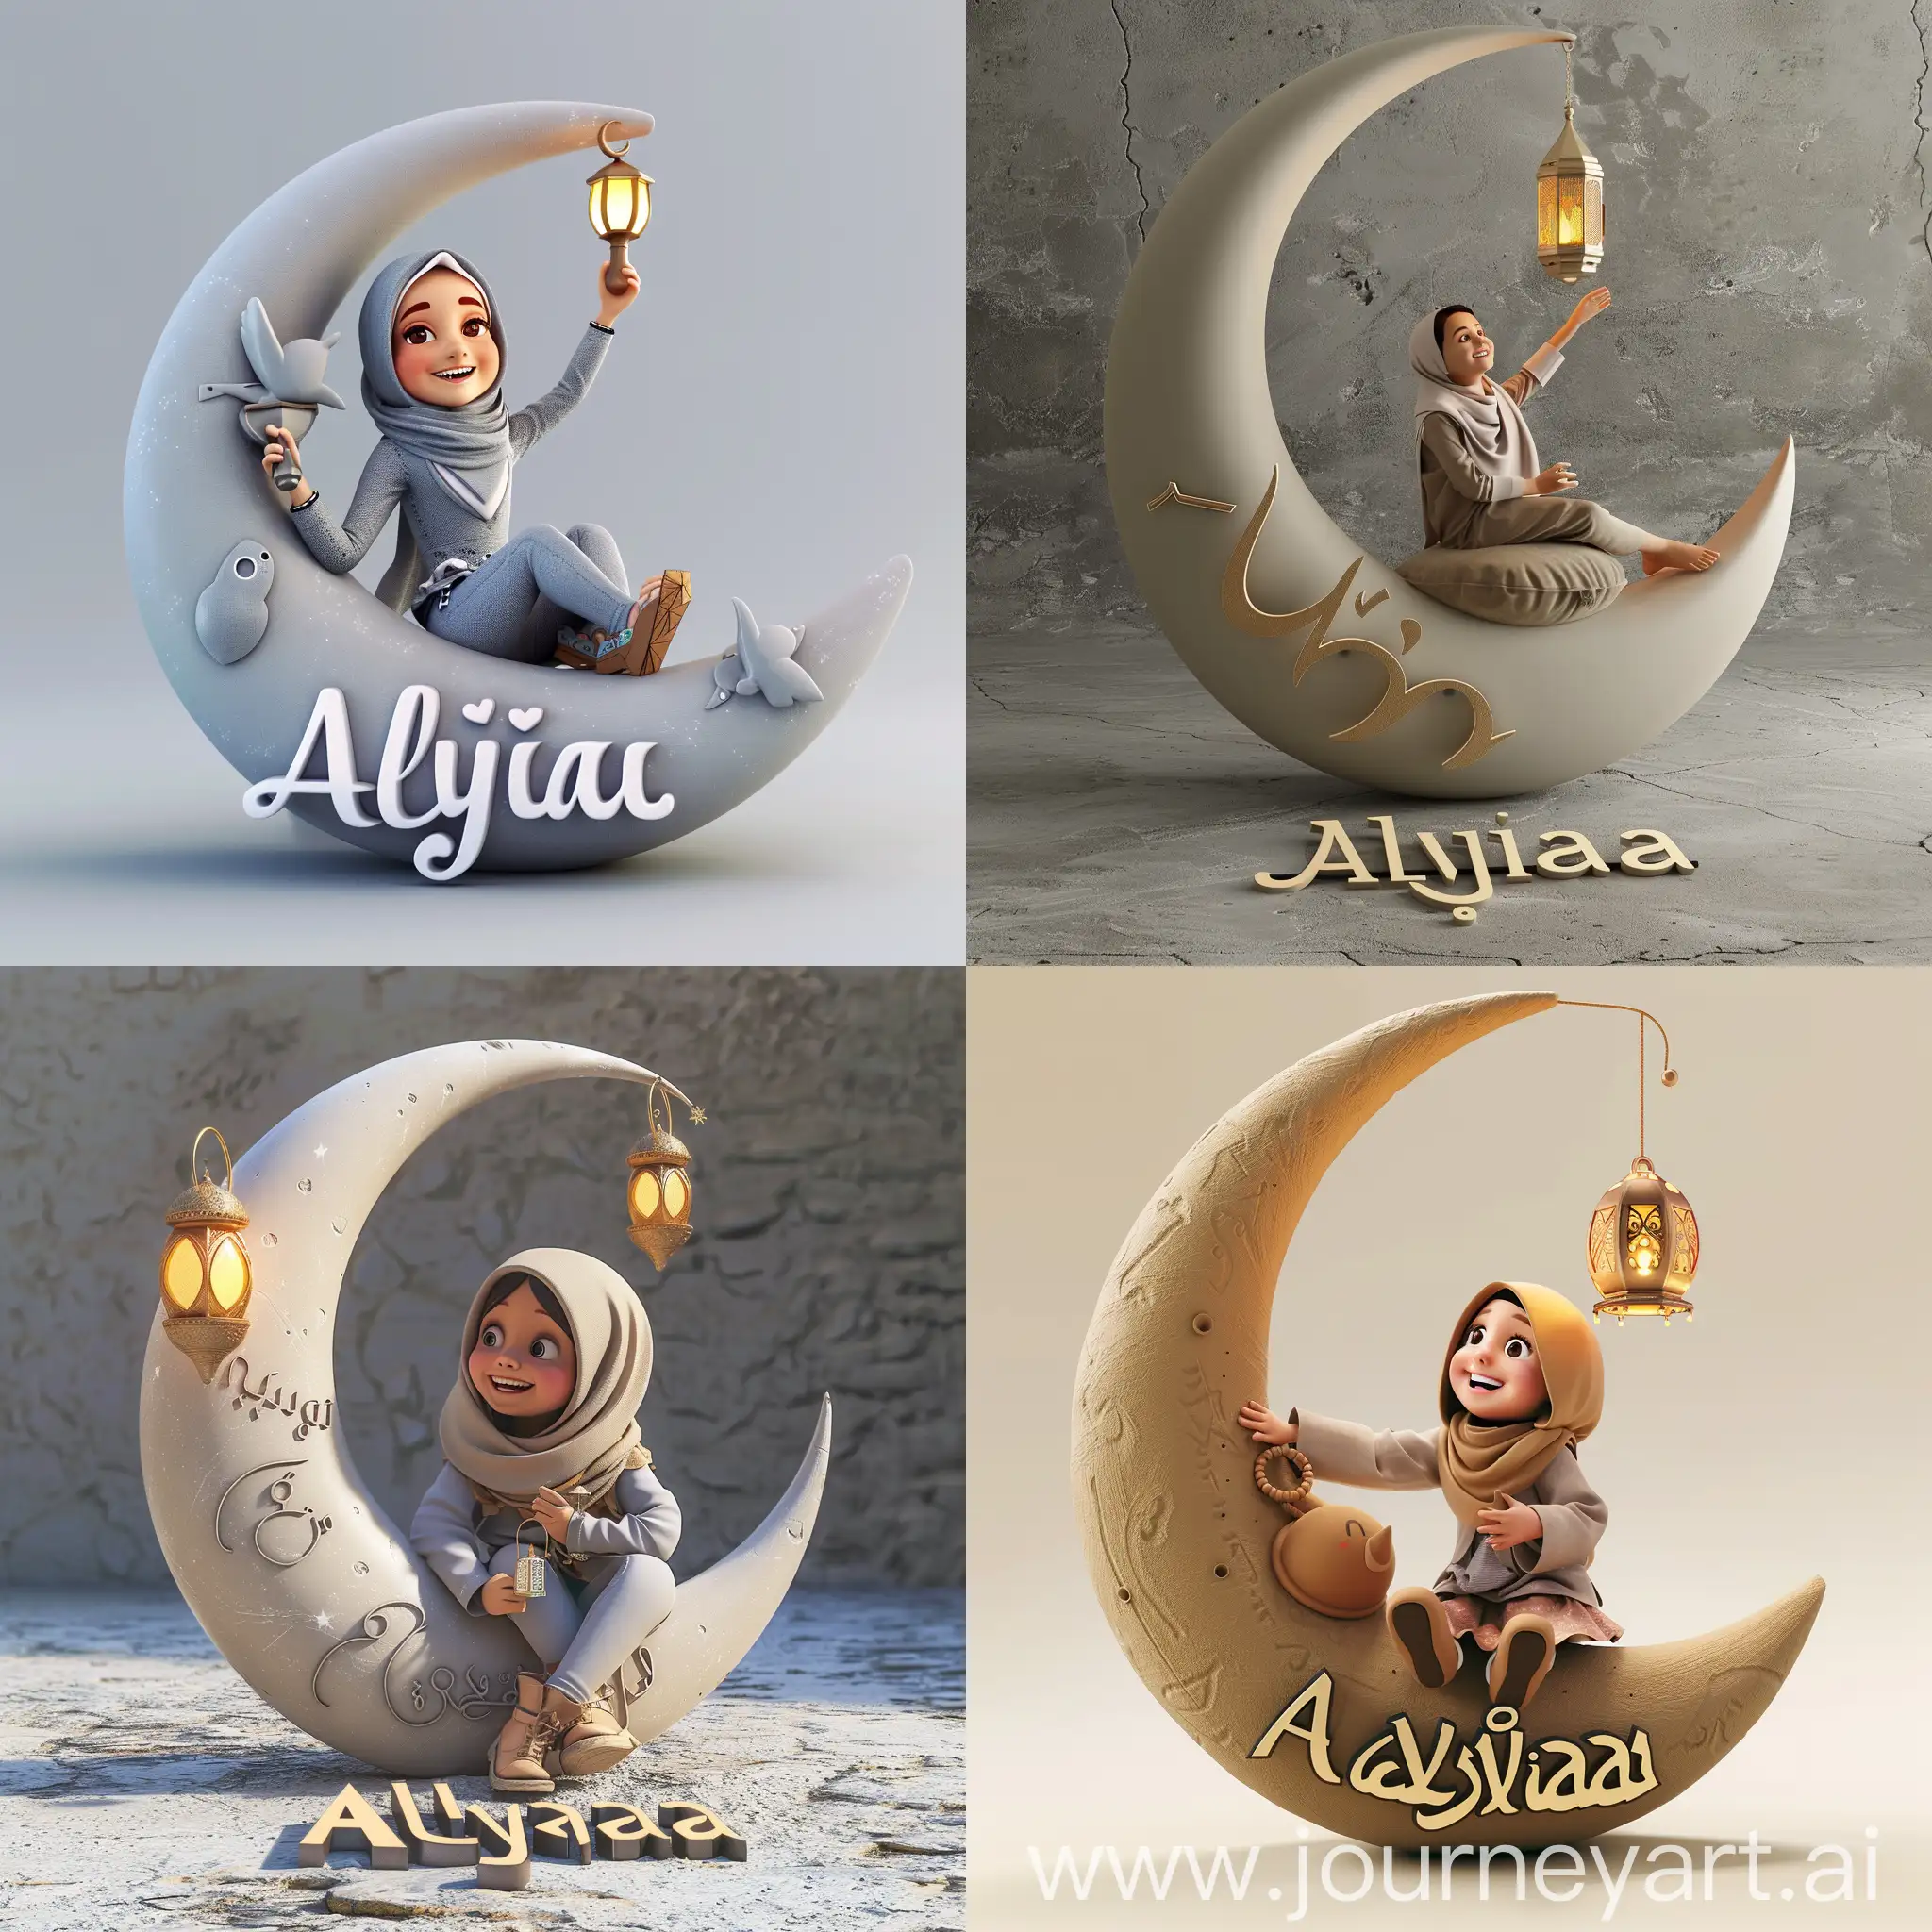 a Muslim girl sitting on a 3d crescent moon holding a Ramadan lantern and smiling, on the ground there is a big 3d text "Alyaa"